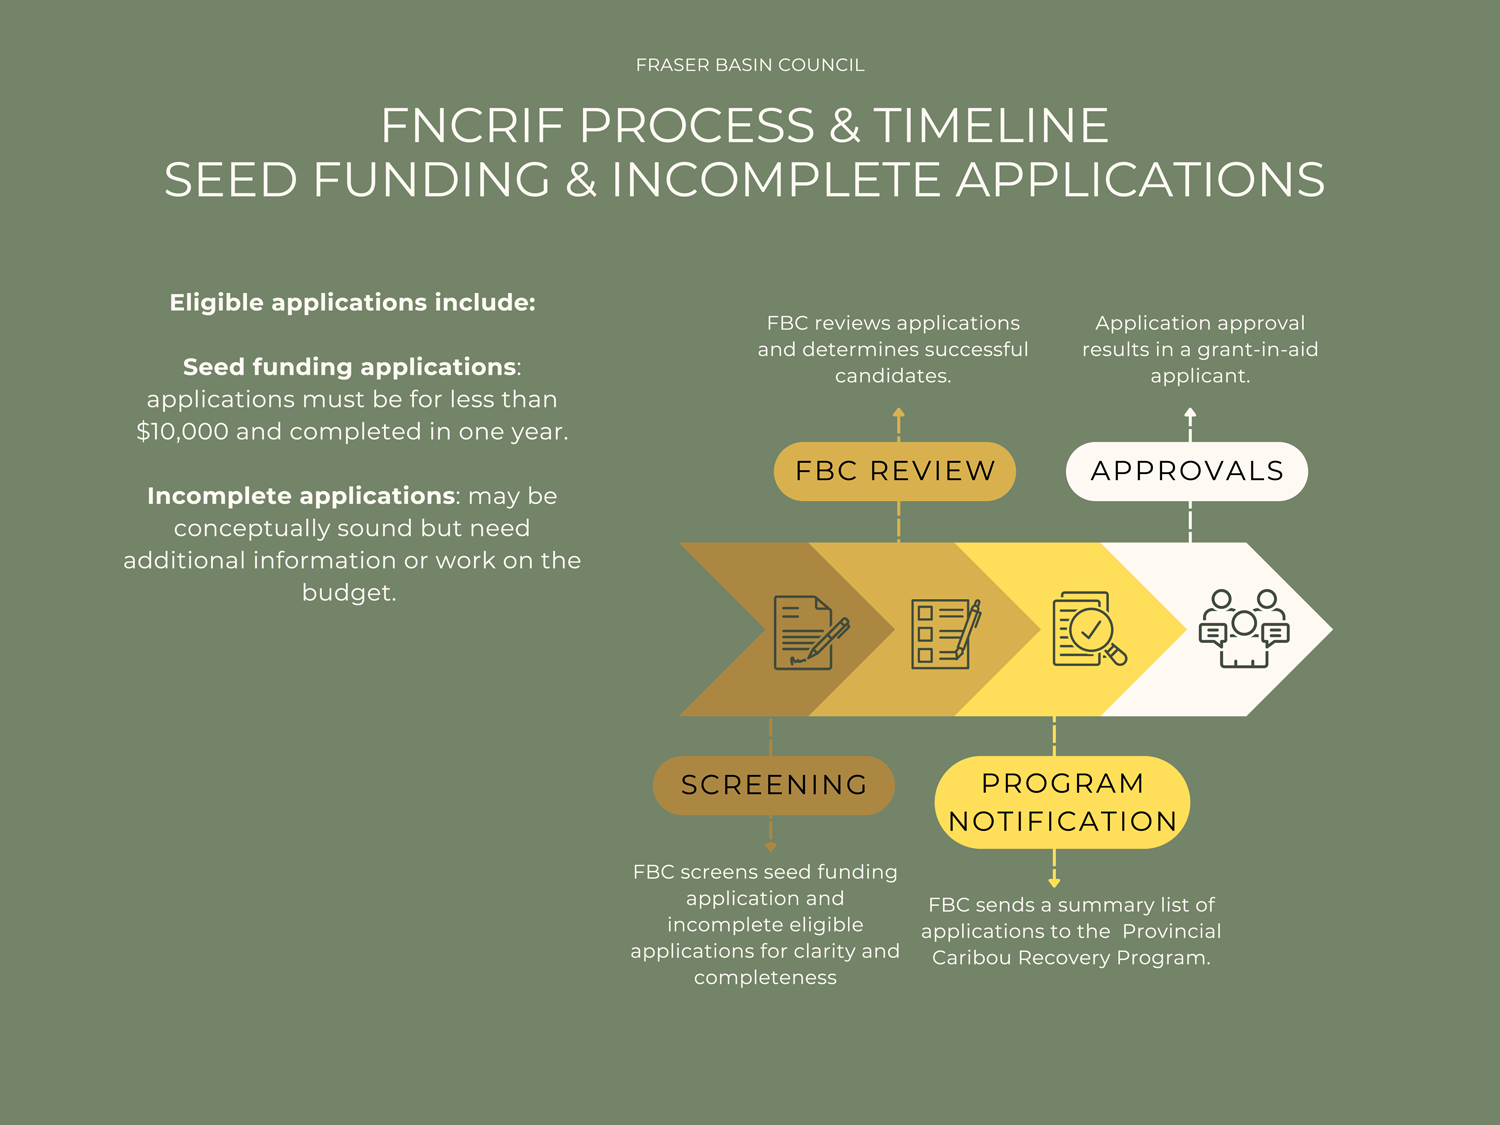 Community-Caribou/FNCRIF-Seed-Funding-Process_1500.png